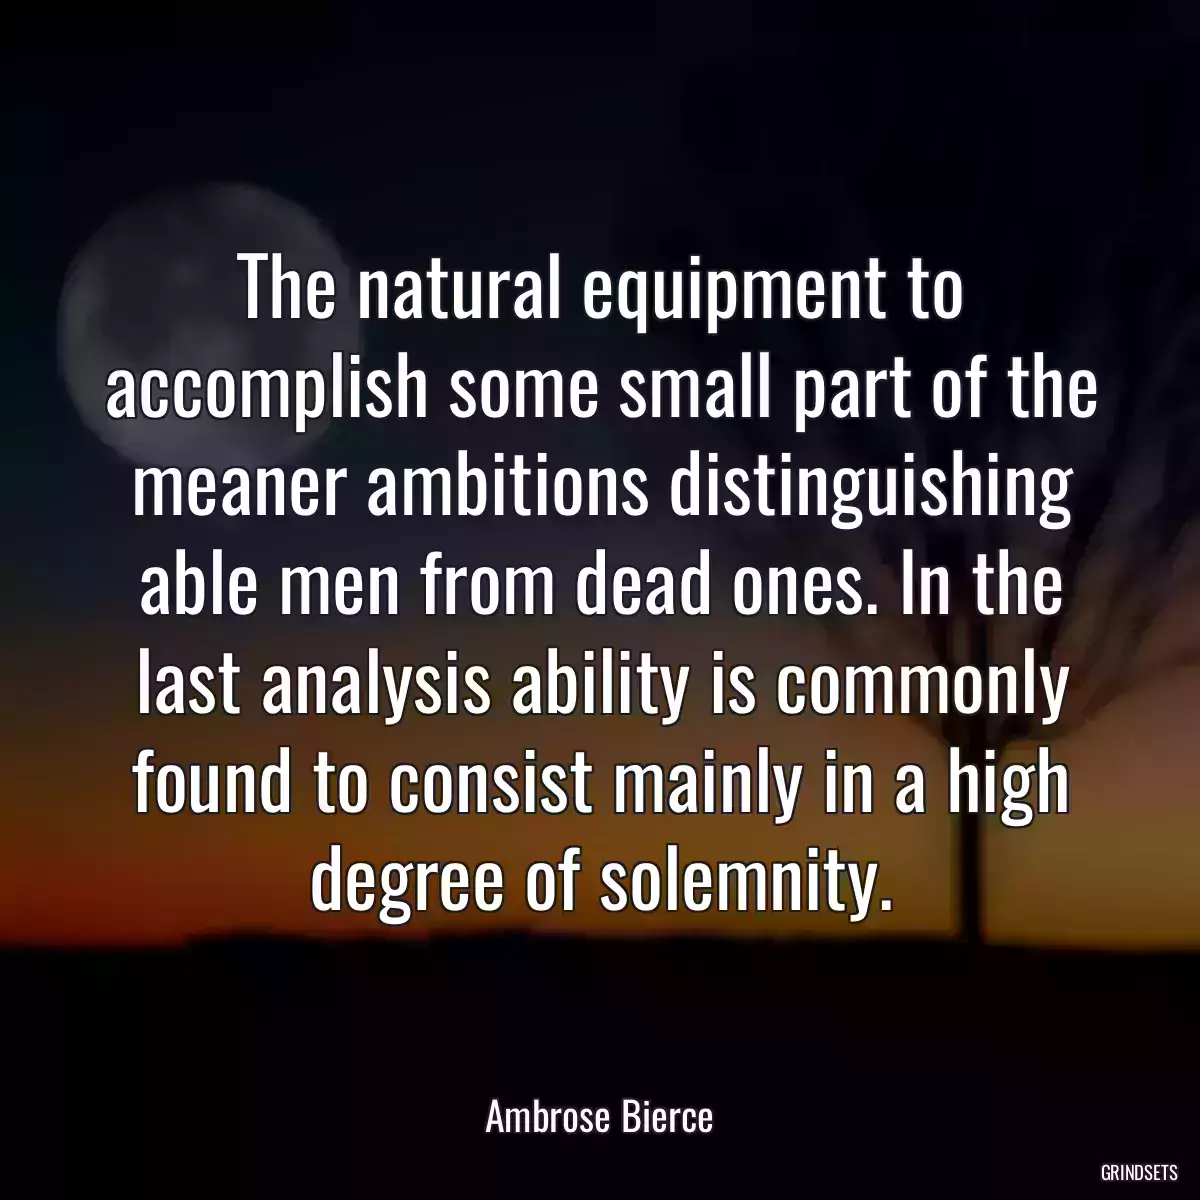 The natural equipment to accomplish some small part of the meaner ambitions distinguishing able men from dead ones. In the last analysis ability is commonly found to consist mainly in a high degree of solemnity.